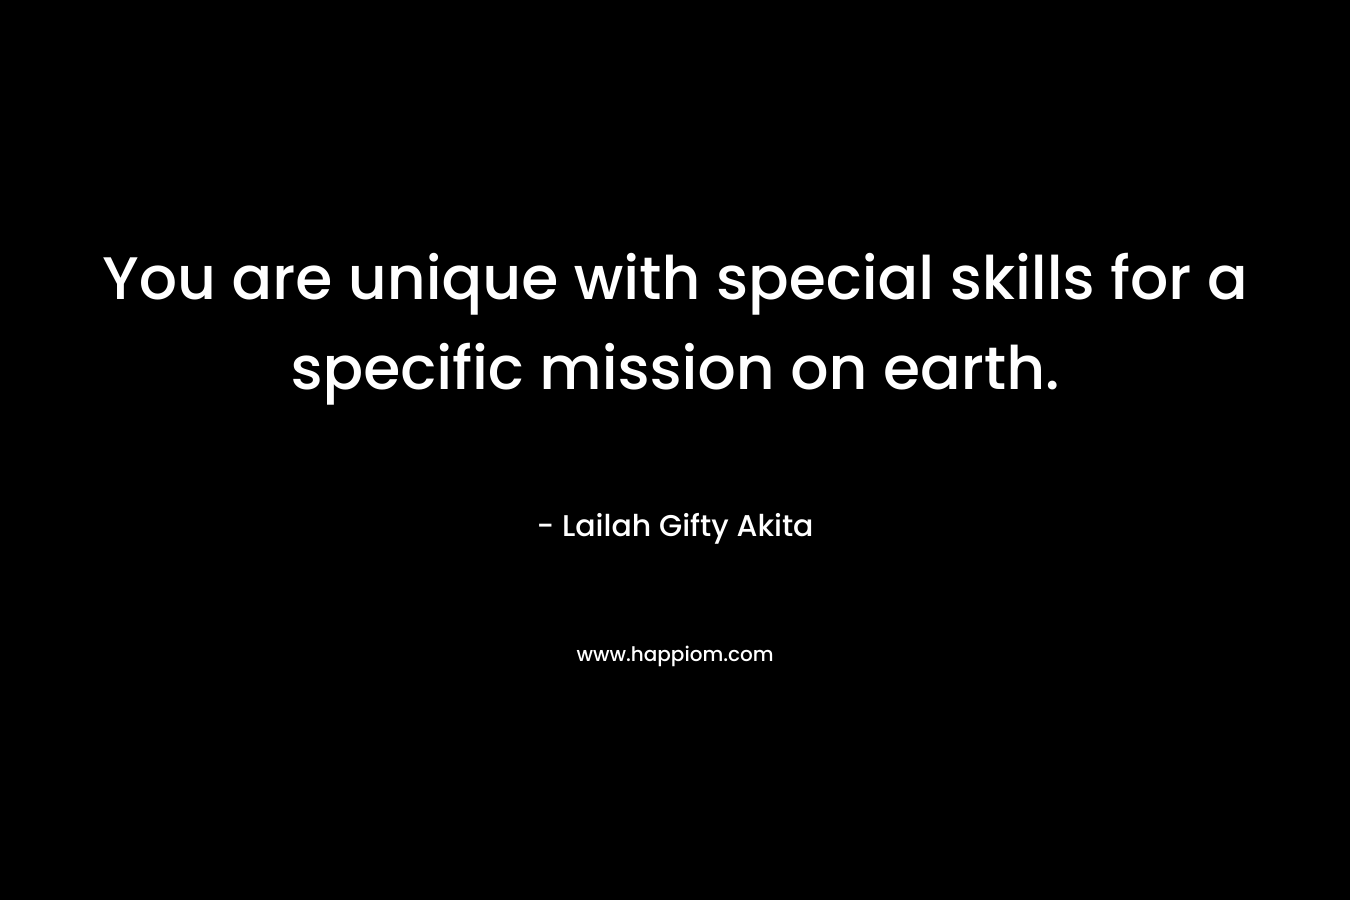 You are unique with special skills for a specific mission on earth.